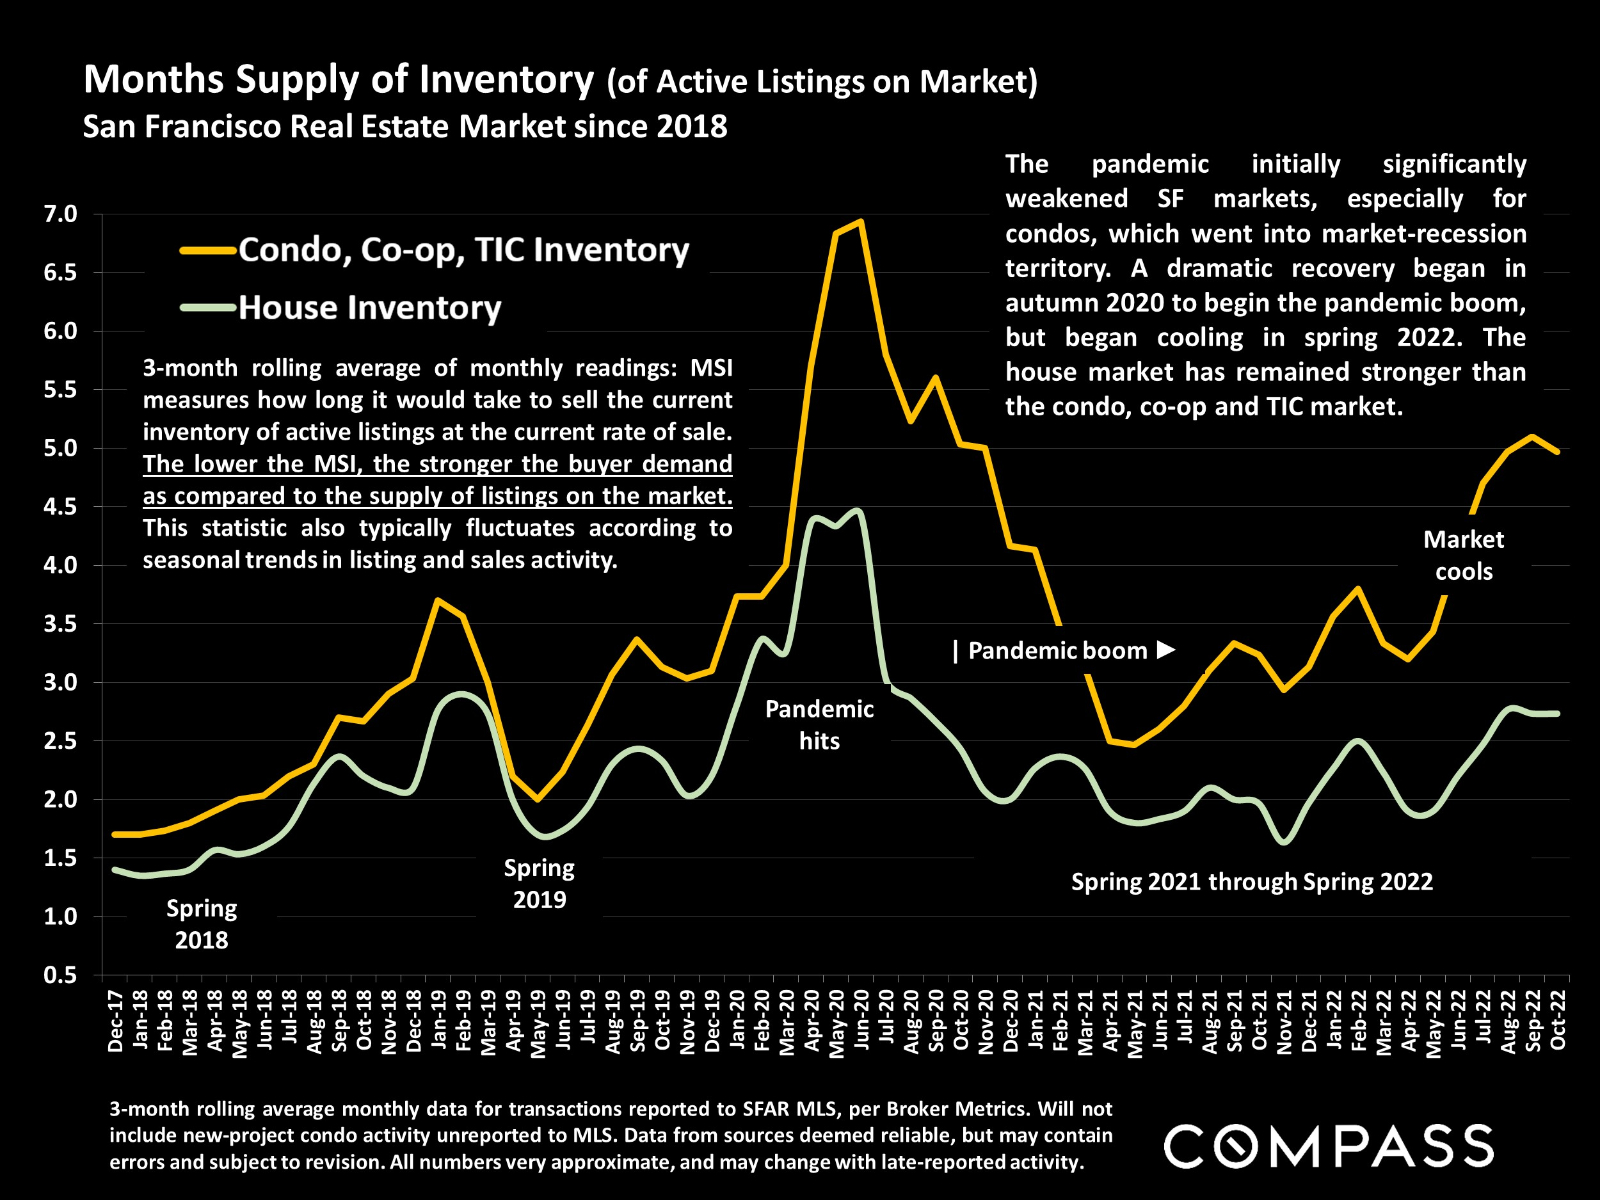 Months Supply of Inventory